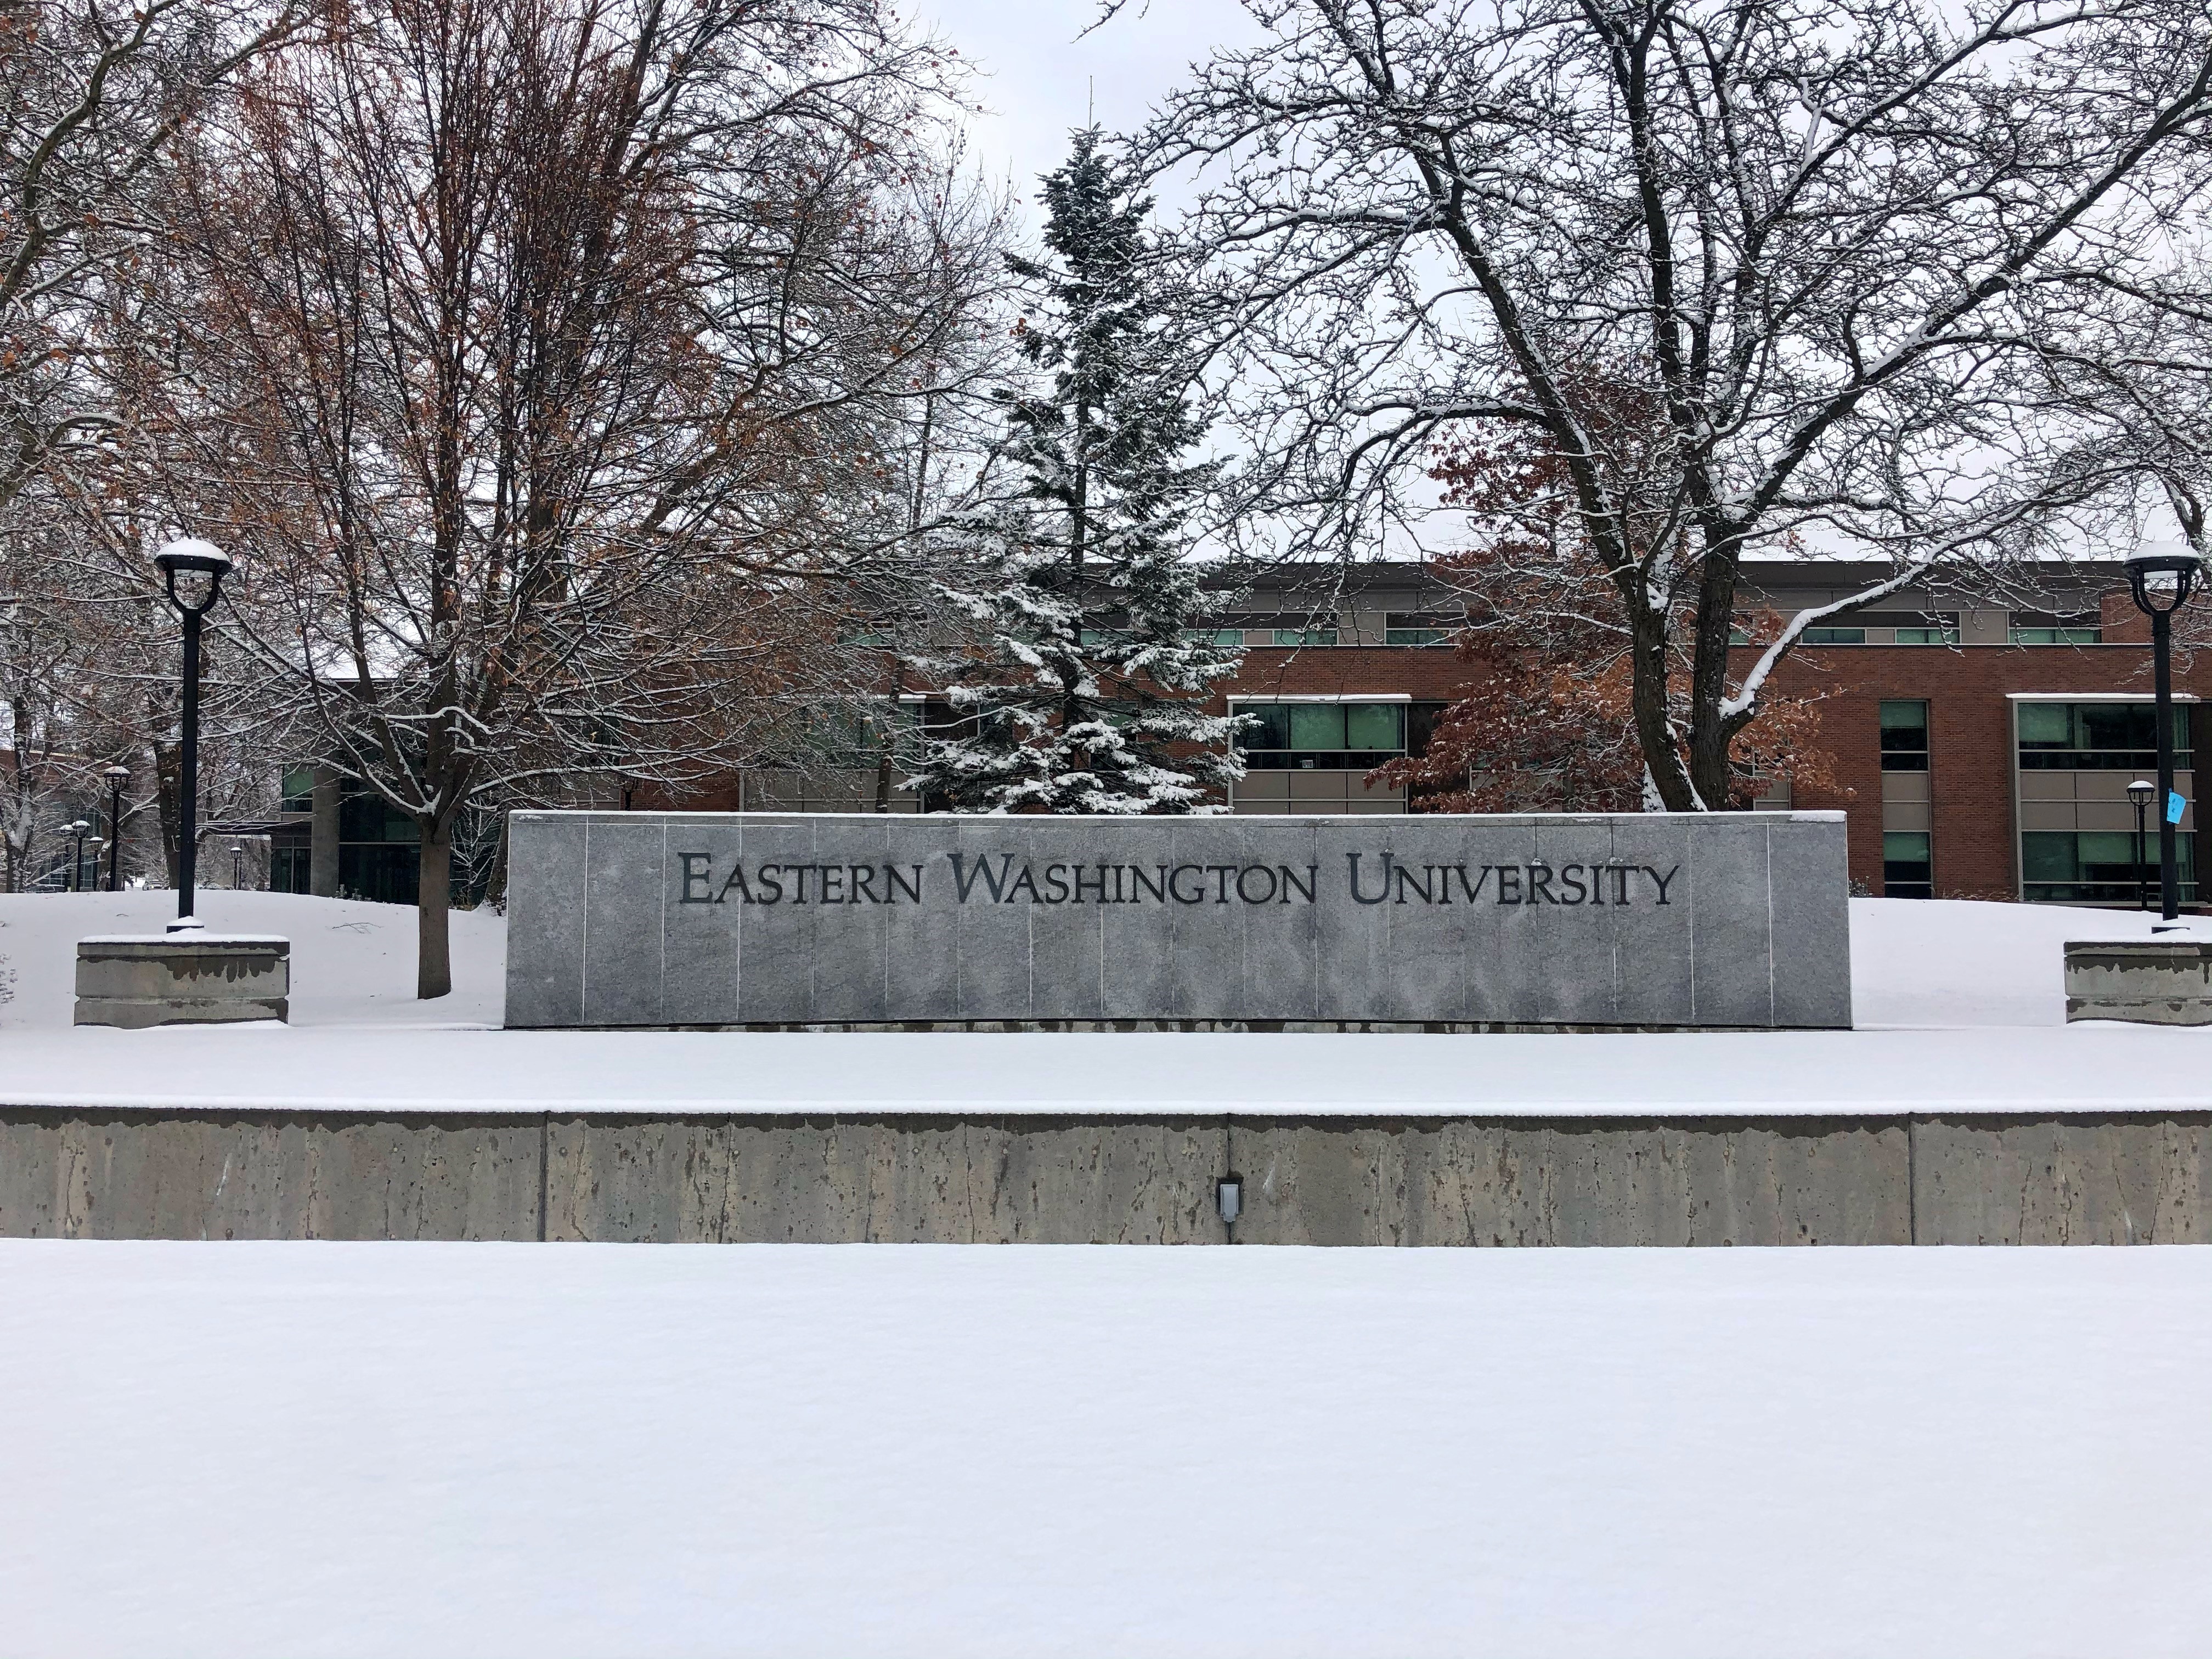 December 2019 Pictures from Eastern Washington University